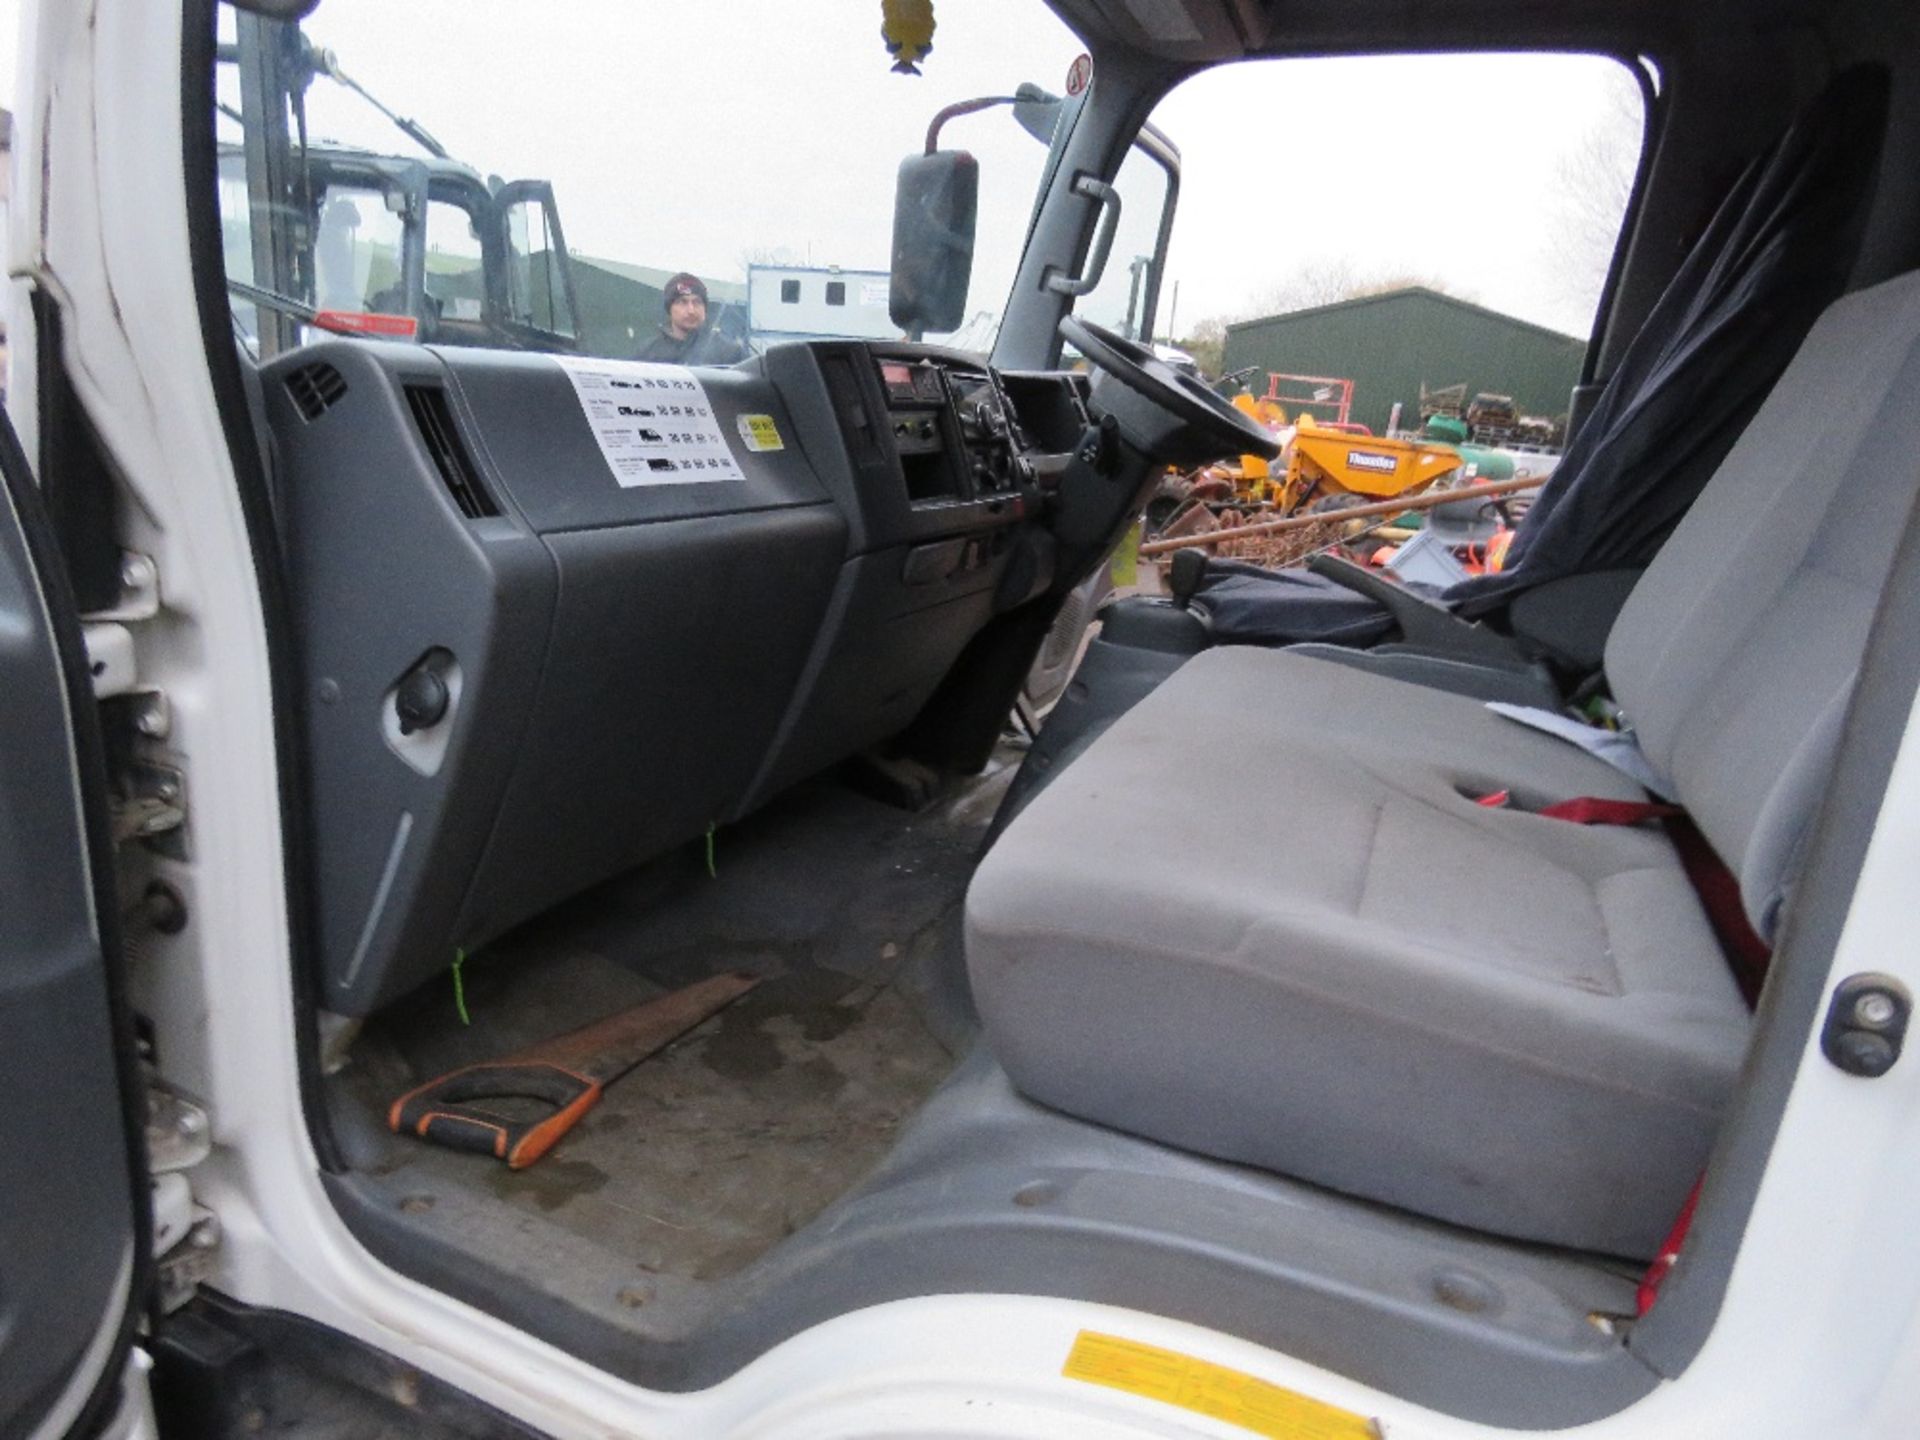 ISUZU URBAN EURO 6 7500KG TIPPER LORRY REG:AP68 NPX. ONE OWNER FROM NEW WITH V5. DIRECT FROM LOCAL U - Image 3 of 12